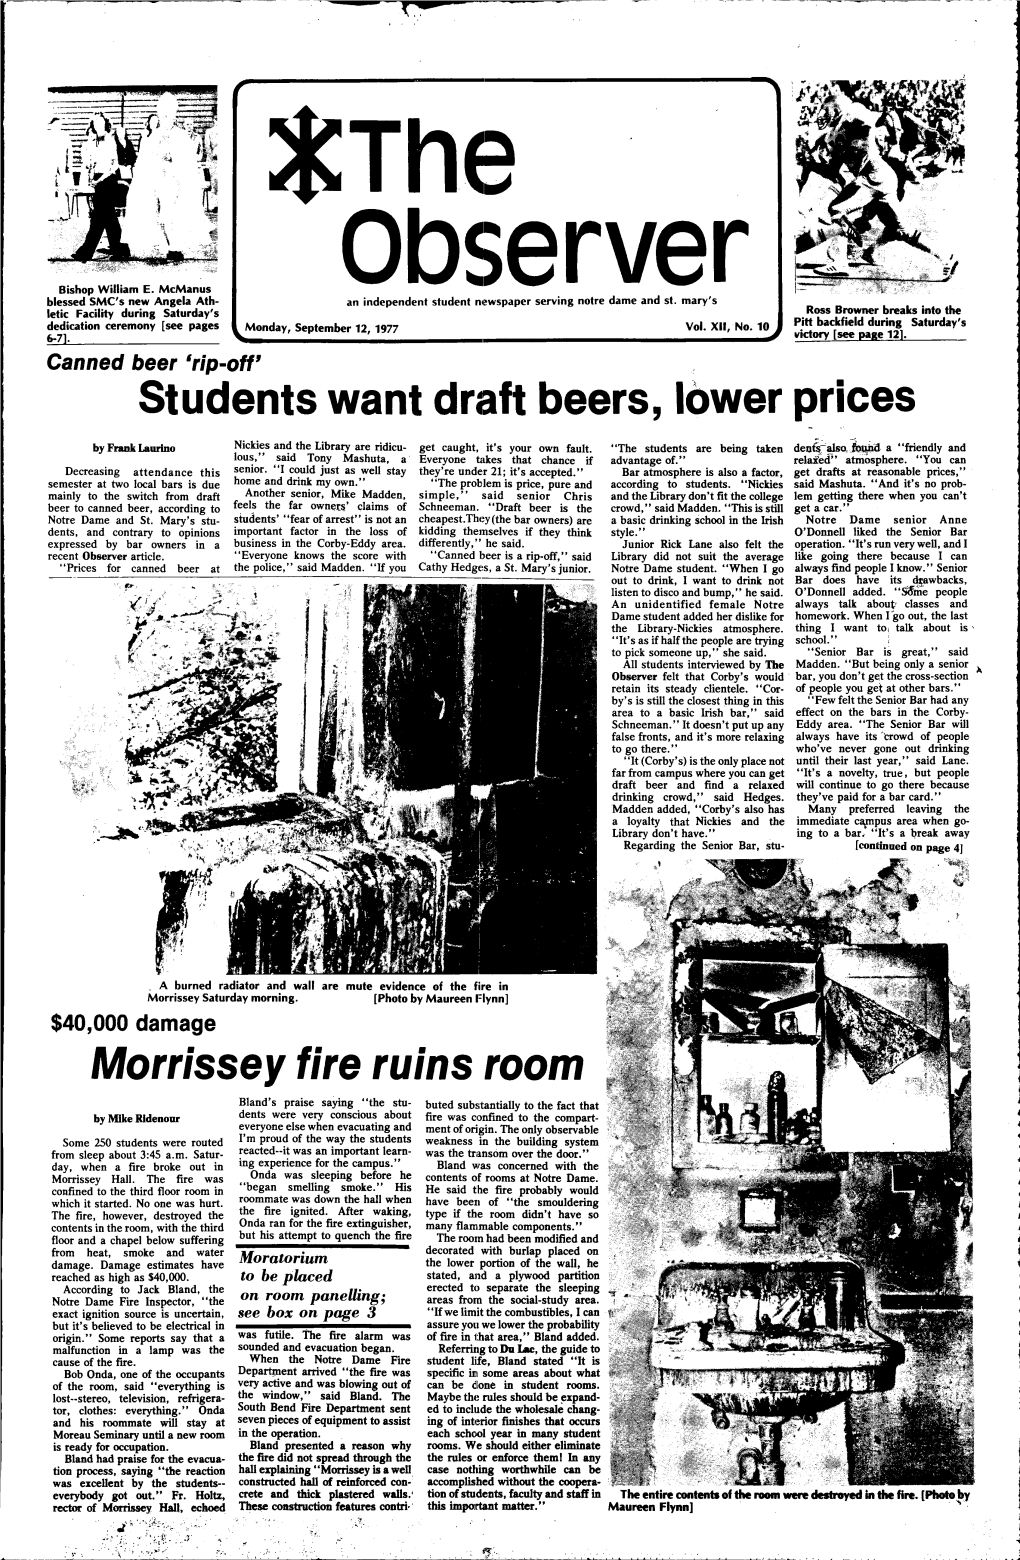 Students Want Draft Beers, Lower Prices Morrissey Fire Ruins Room